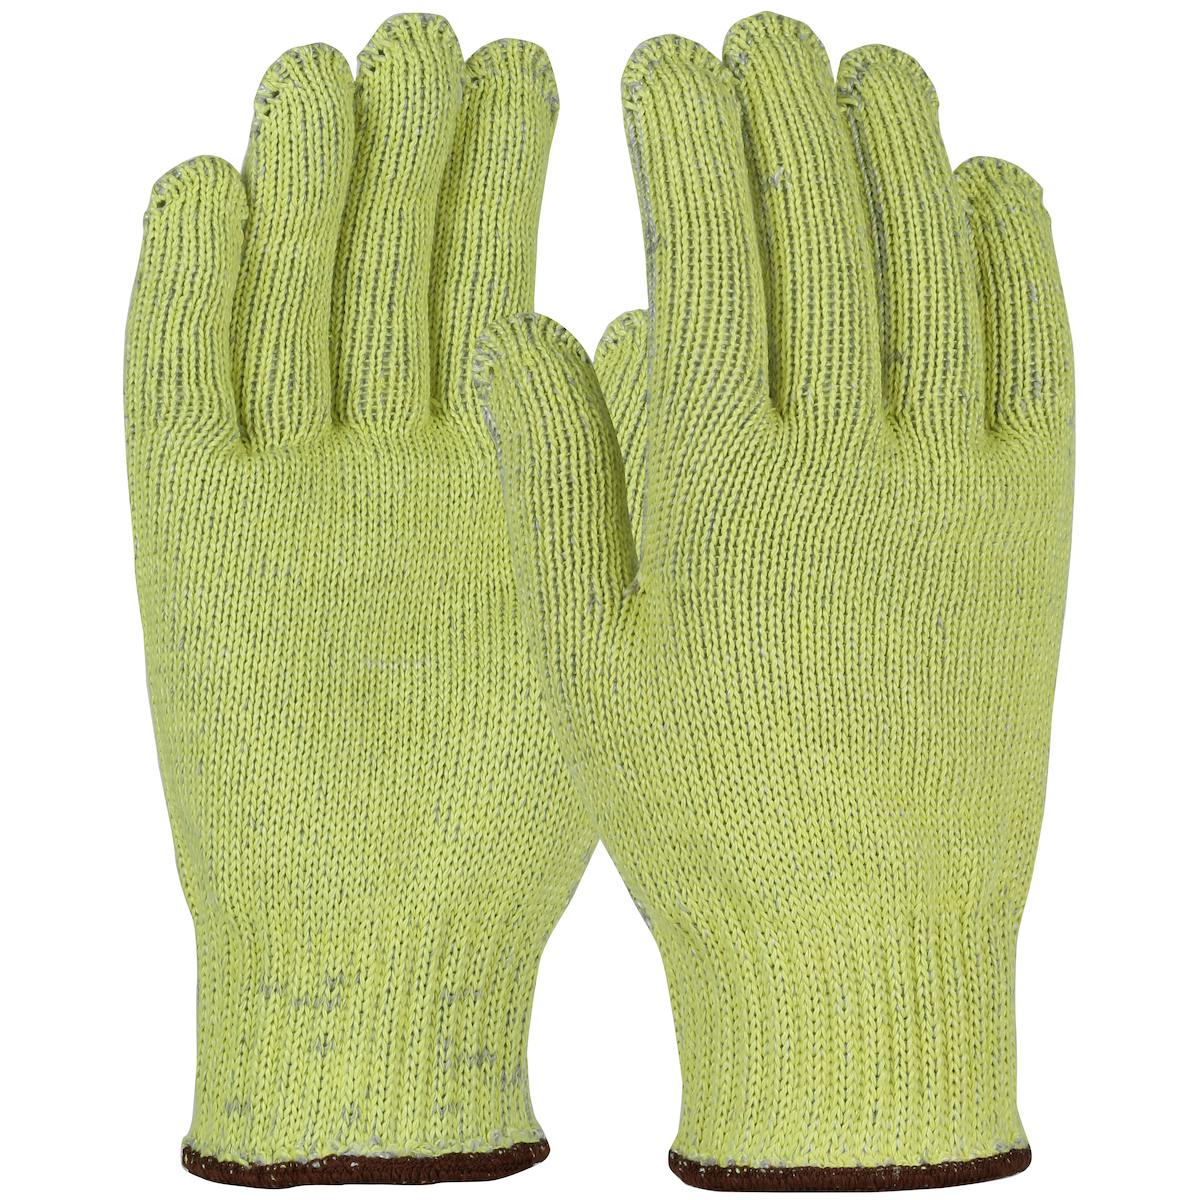 Kut Gard® Seamless Knit ATA® / Aramid Blended Glove with Cotton/Polyester Plating - Heavy Weight (MATA501)